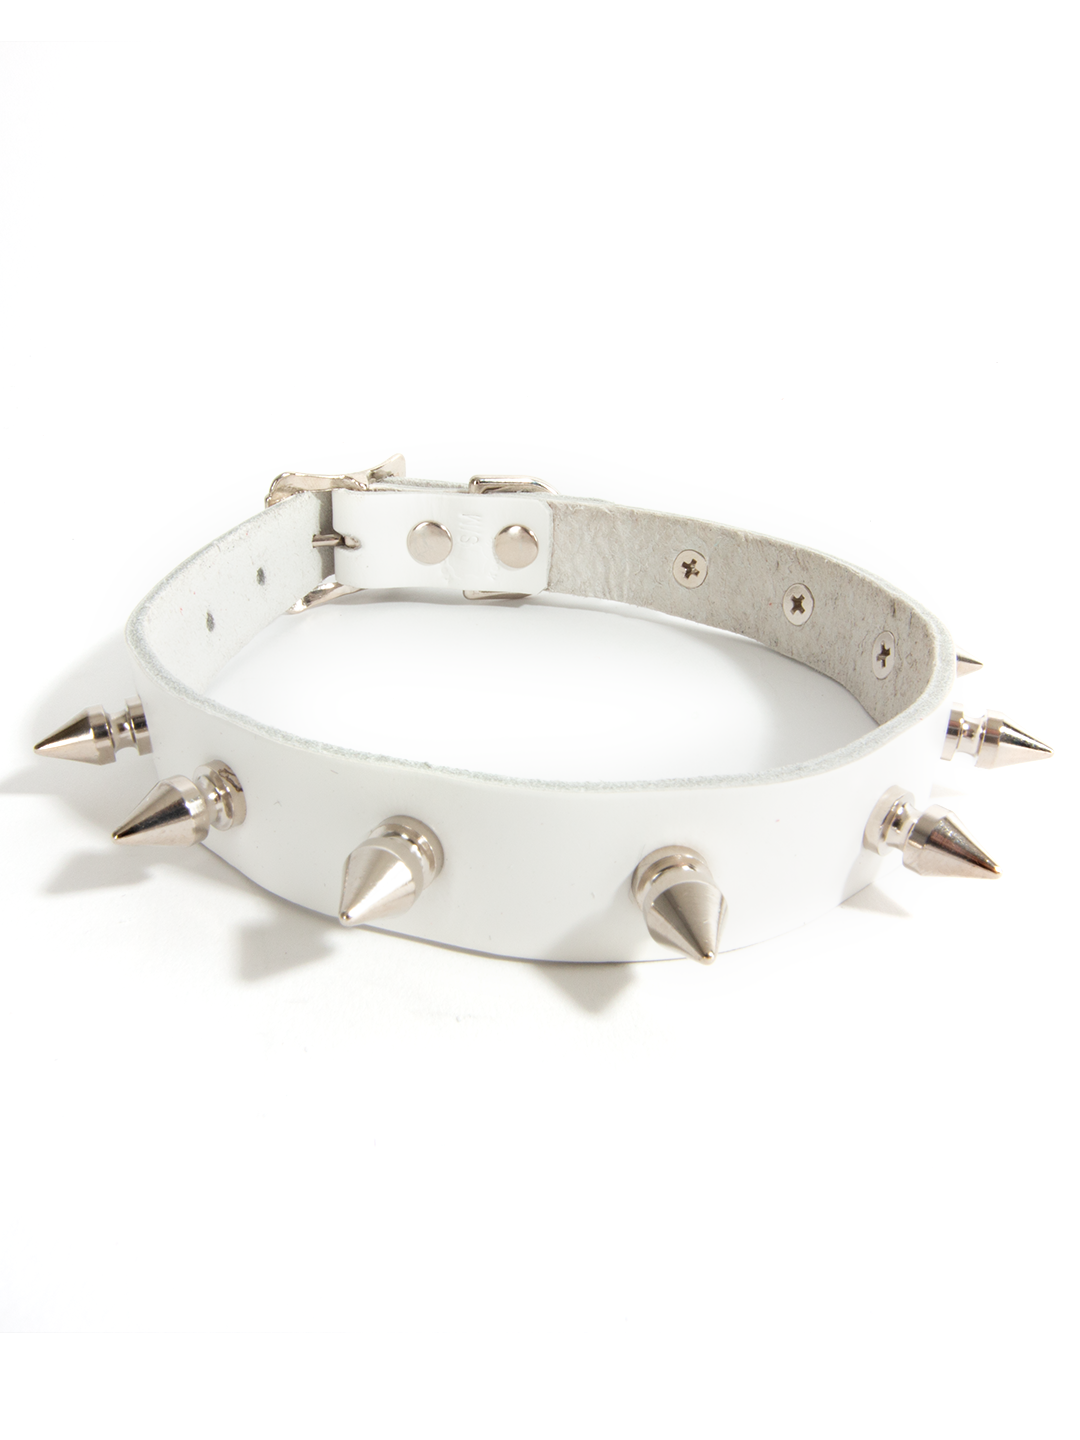 Leather Spiked Collar